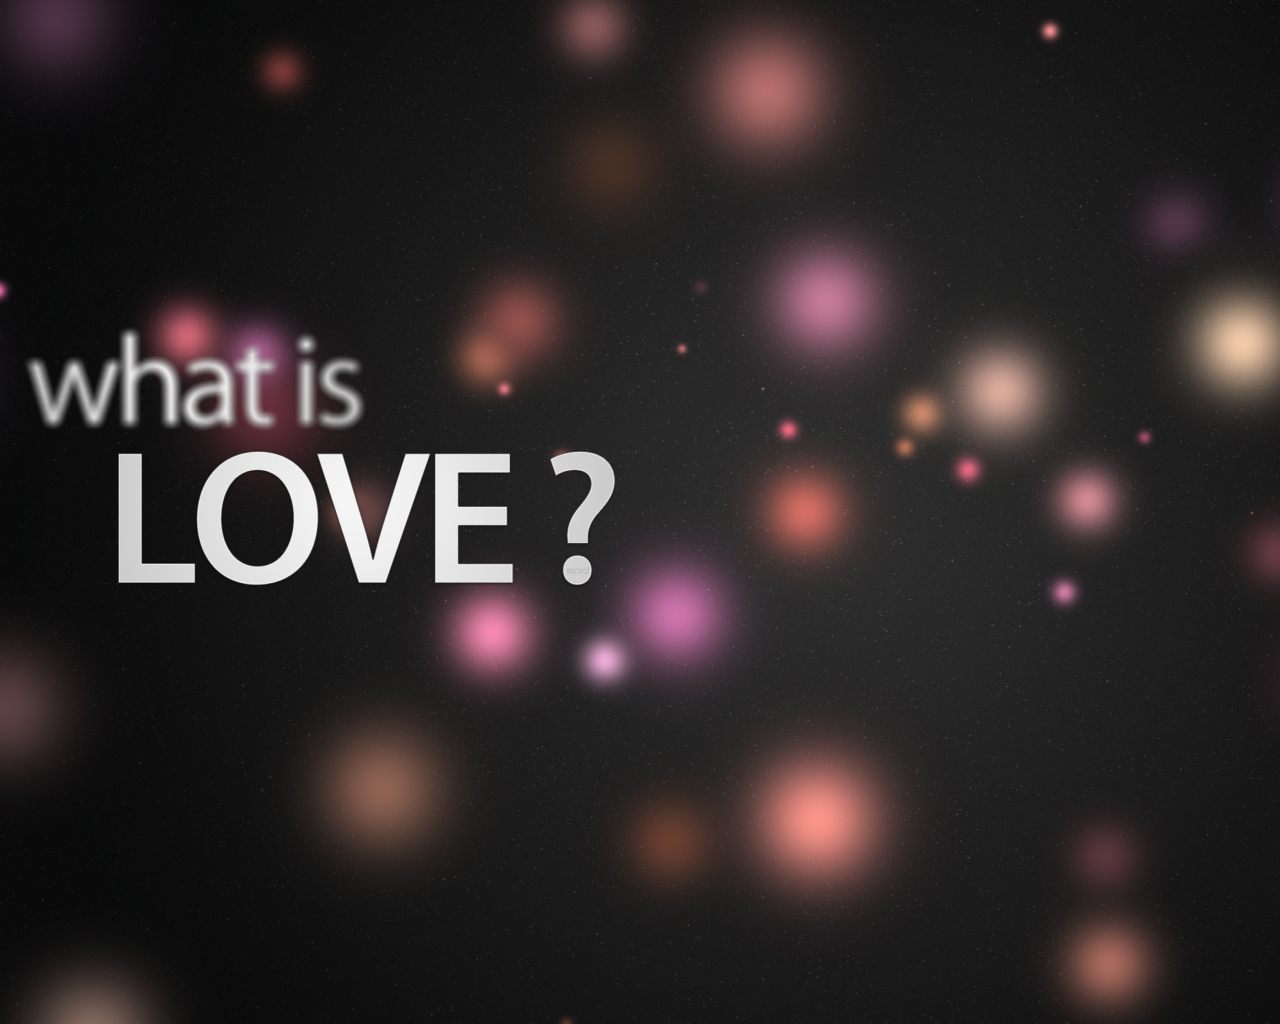 What Is Love? wallpaper 1280x1024